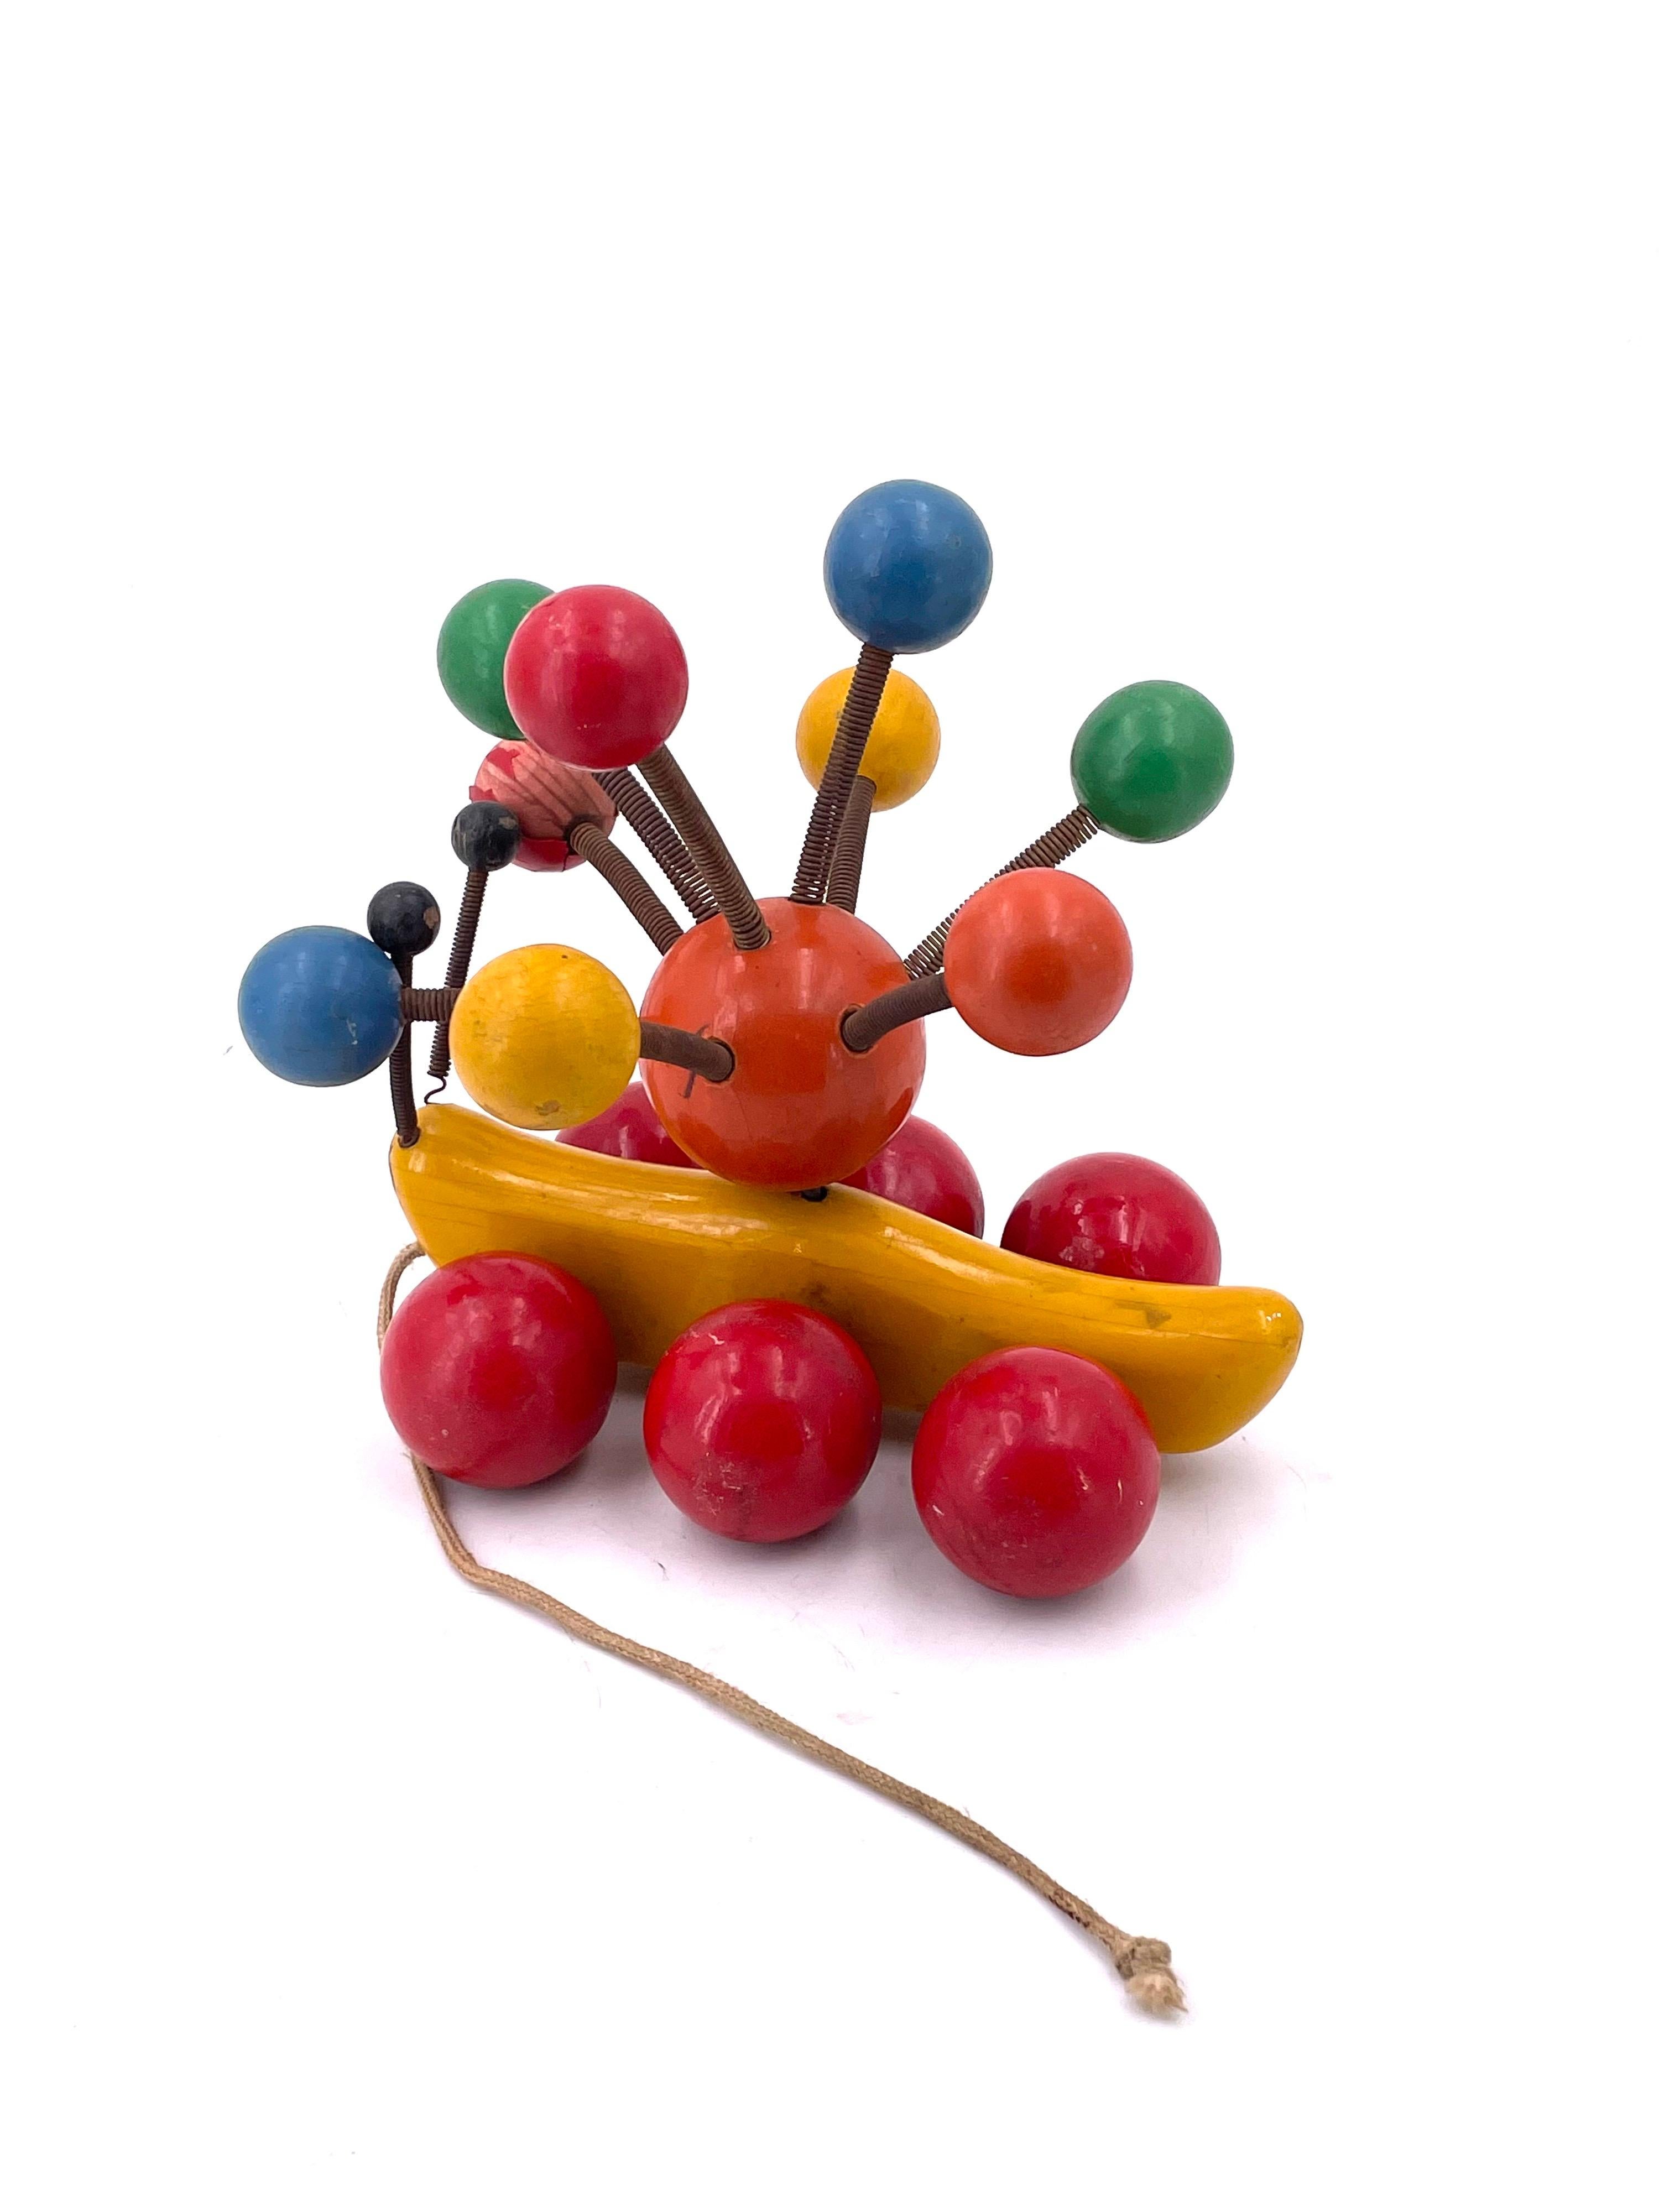 Beautiful unique caterpillar toy solid lacquer painted wood in colorful colors, circa 1950;s Made in Greece by Kouvalias.